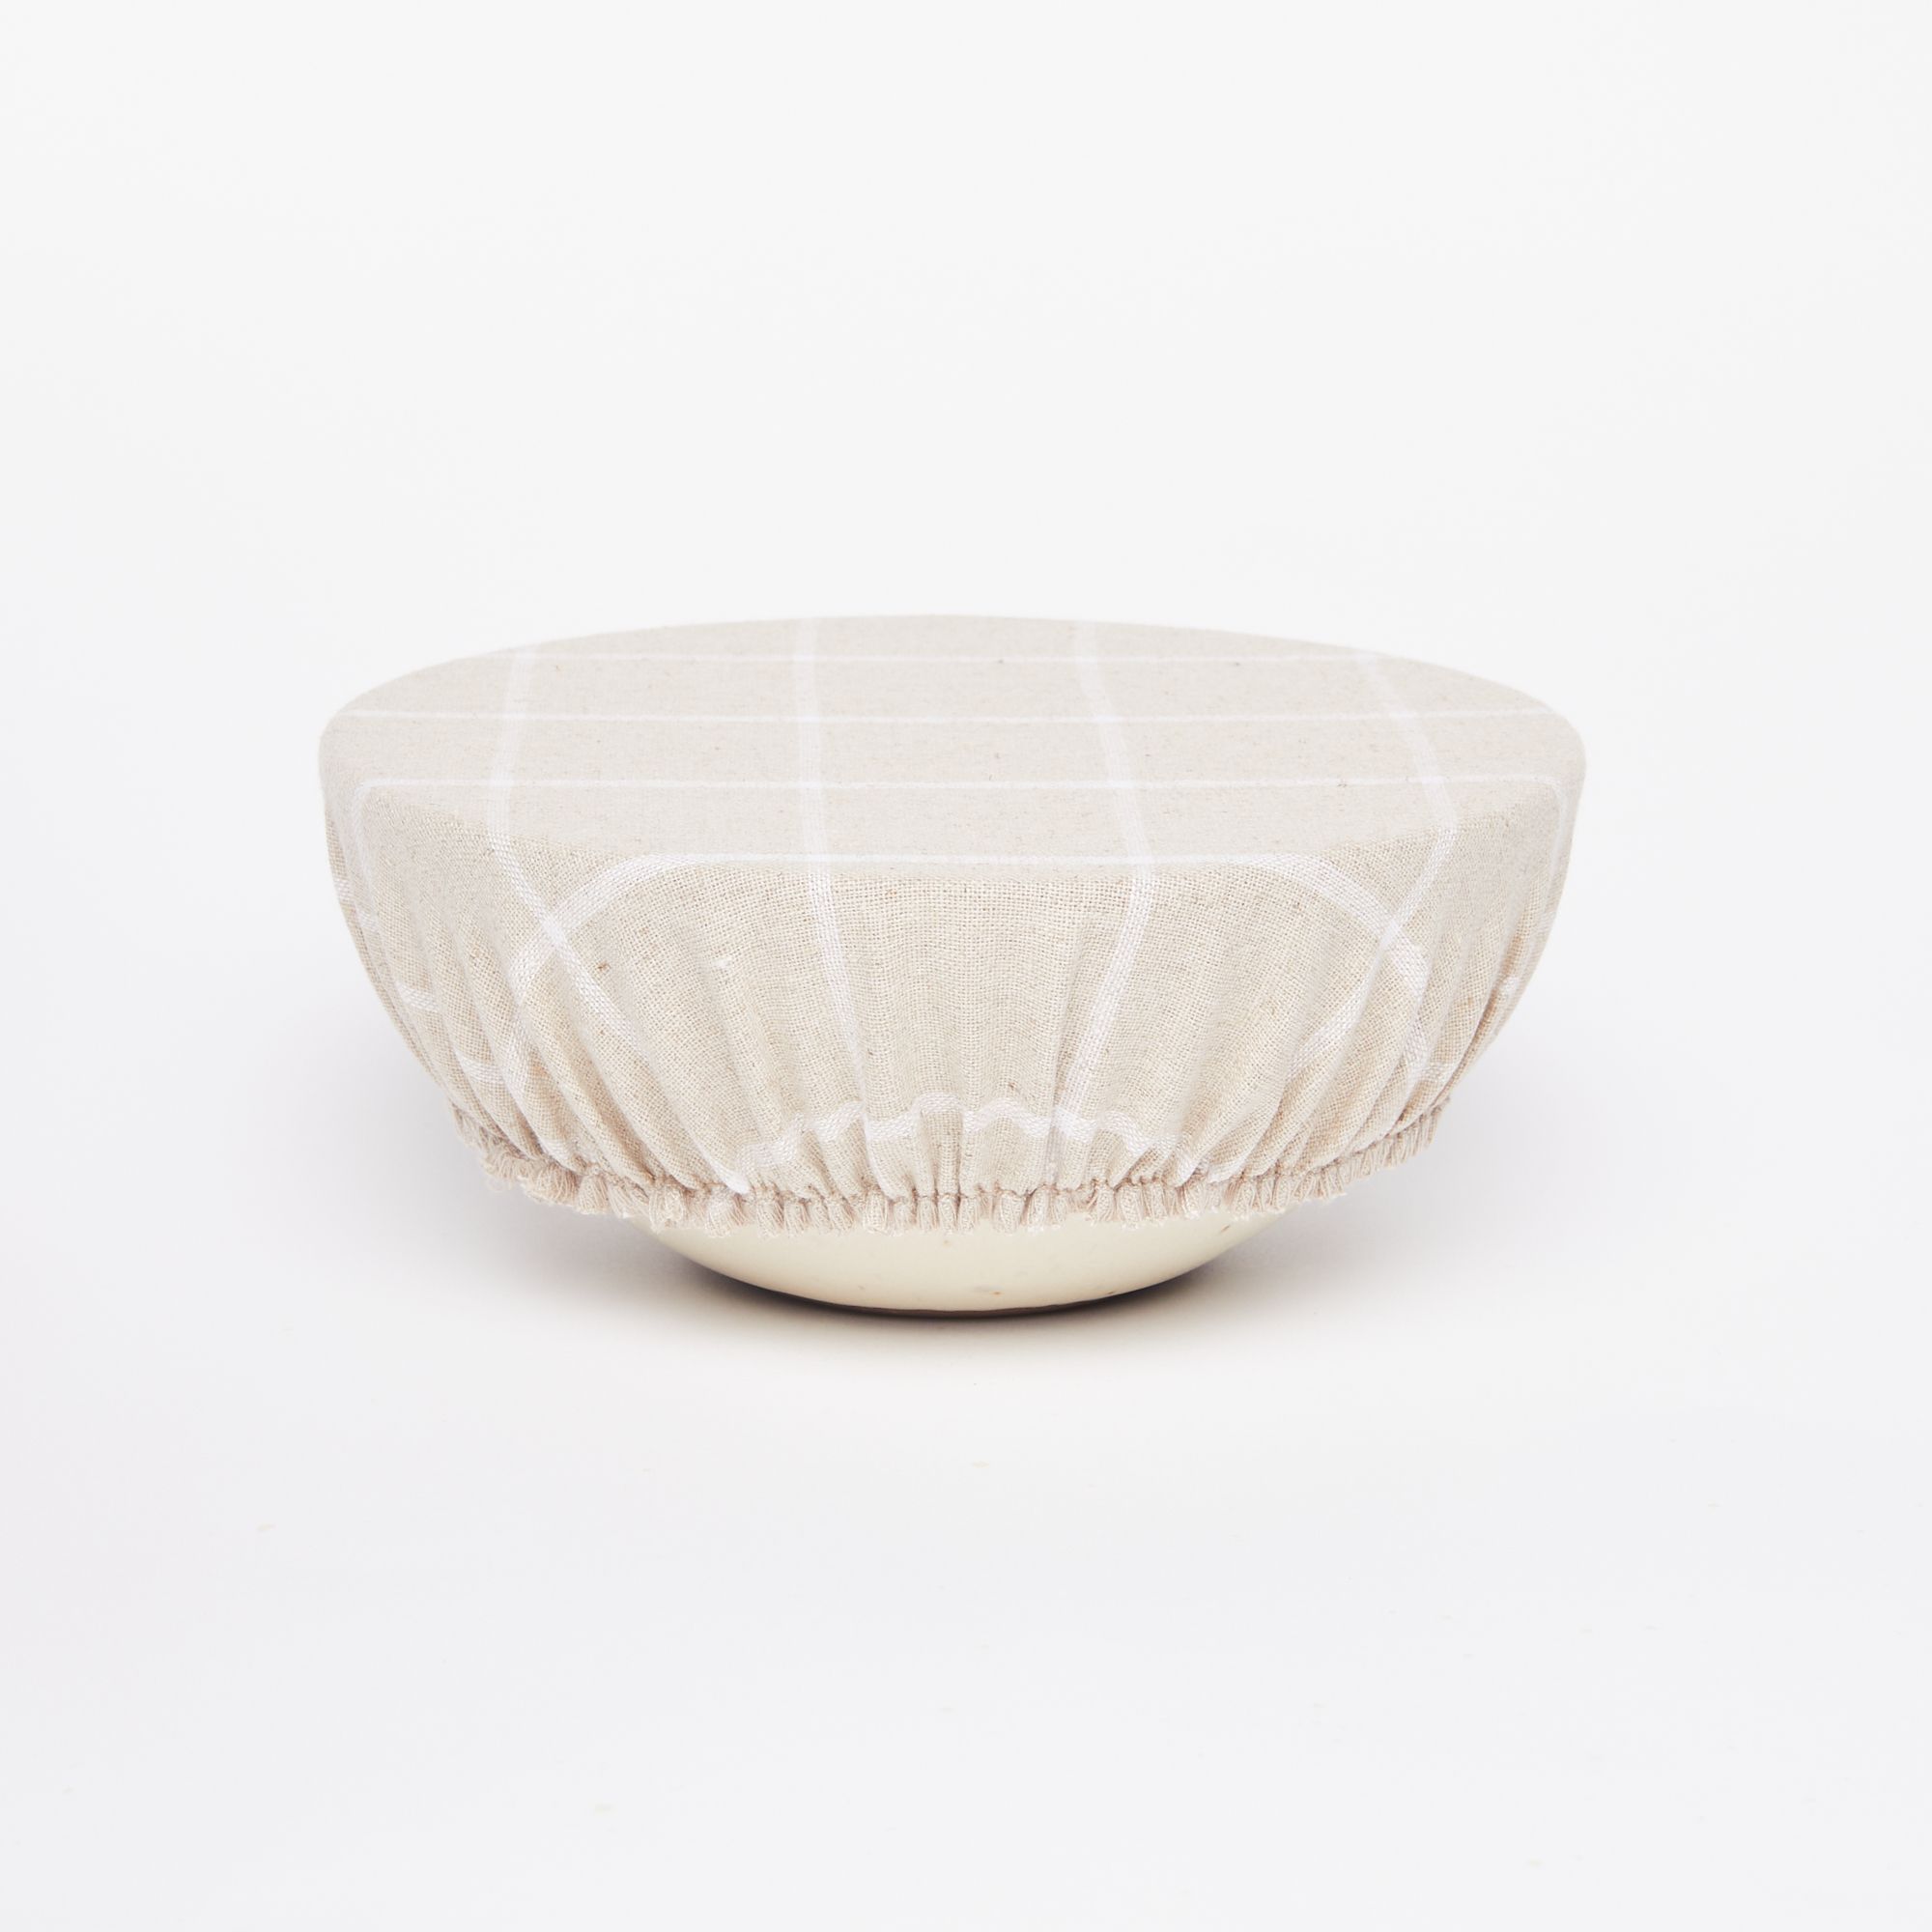 Soup bowl with light tan linen bowl cover with large white grid design